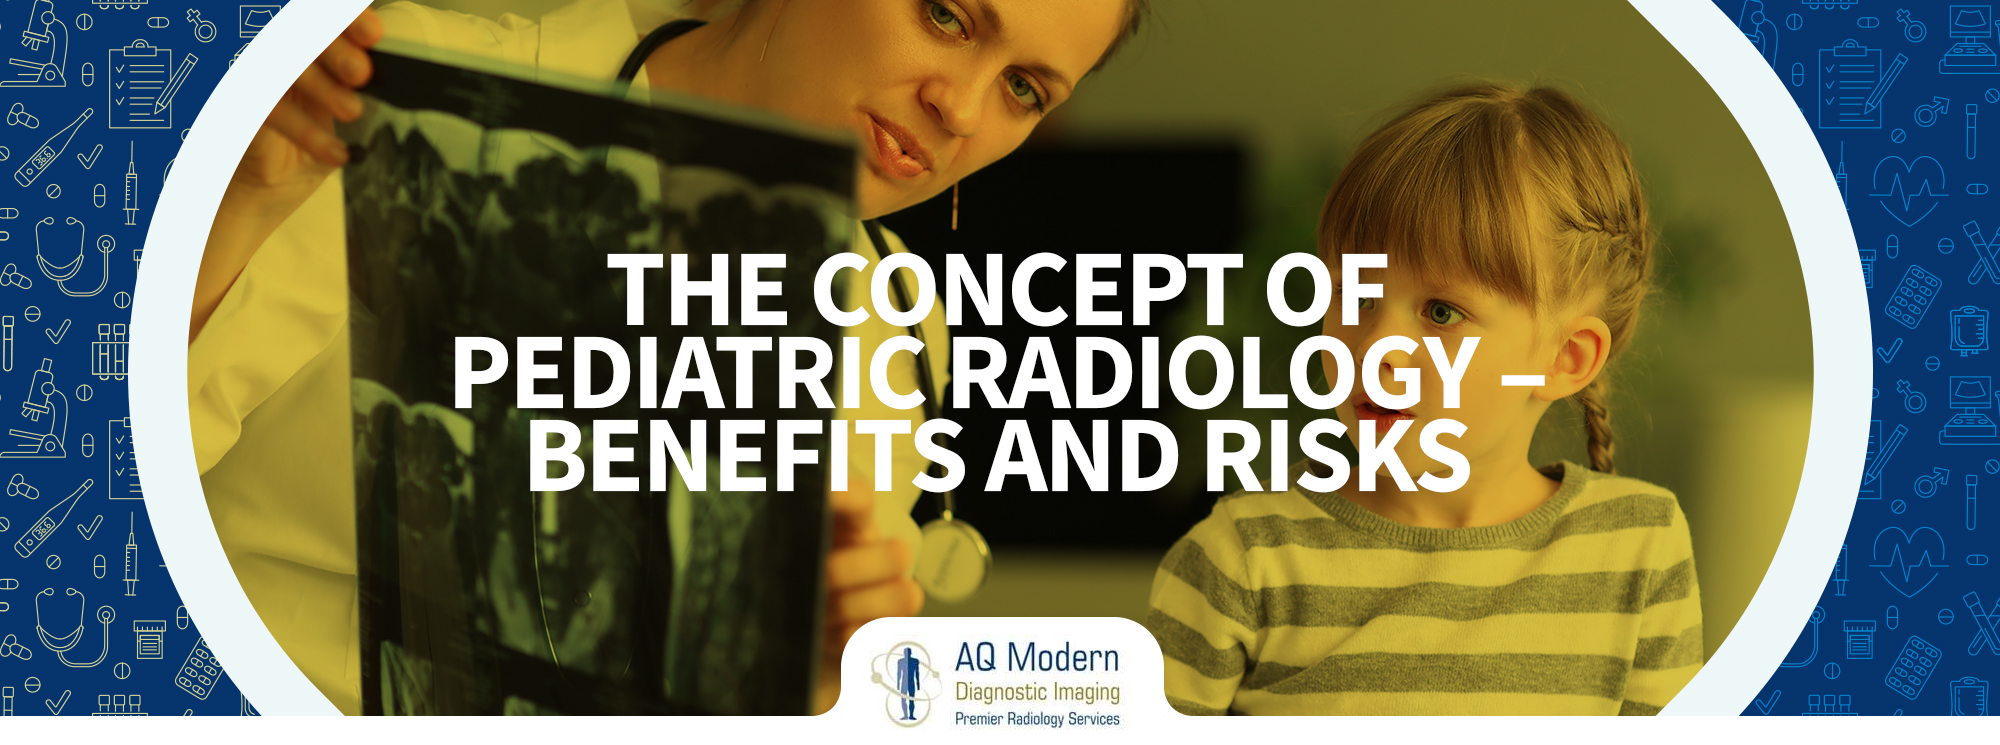 The Concept Of Pediatric Radiology Benefits And Risks